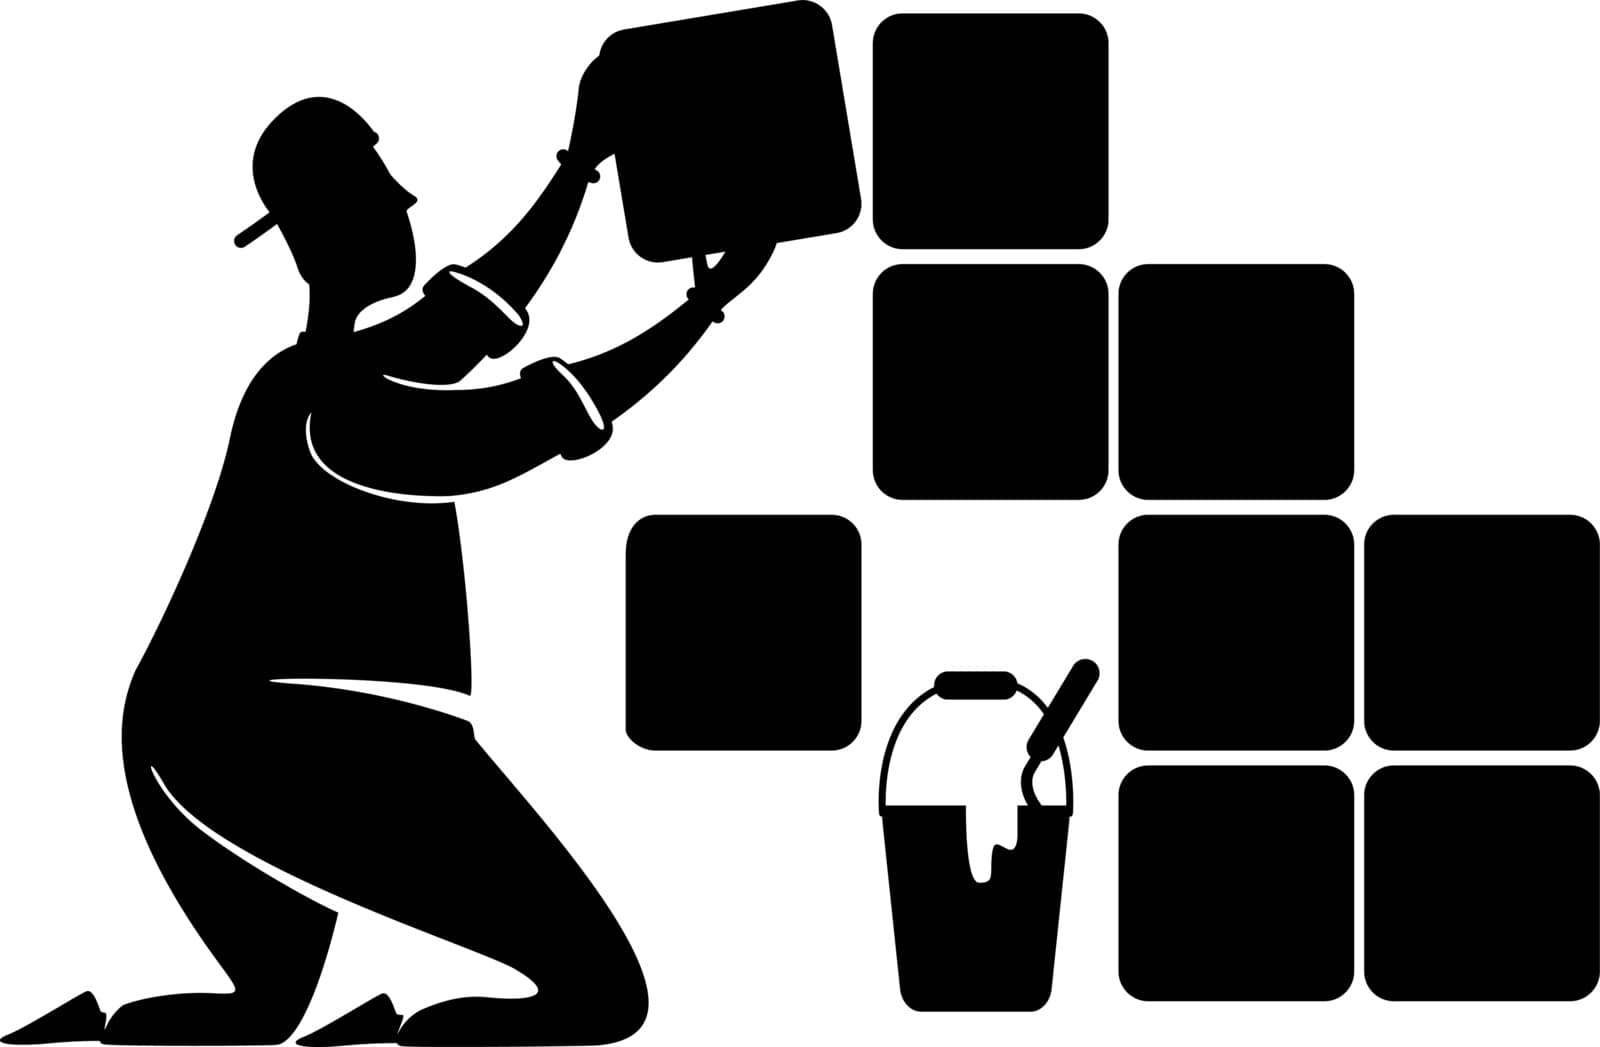 Laying ceramic tiles black silhouette vector illustration. Home repair services. House renovation. Working person pose. Repairman 2d cartoon character shape for commercial, animation, printing. ZIP file contains: EPS, JPG.